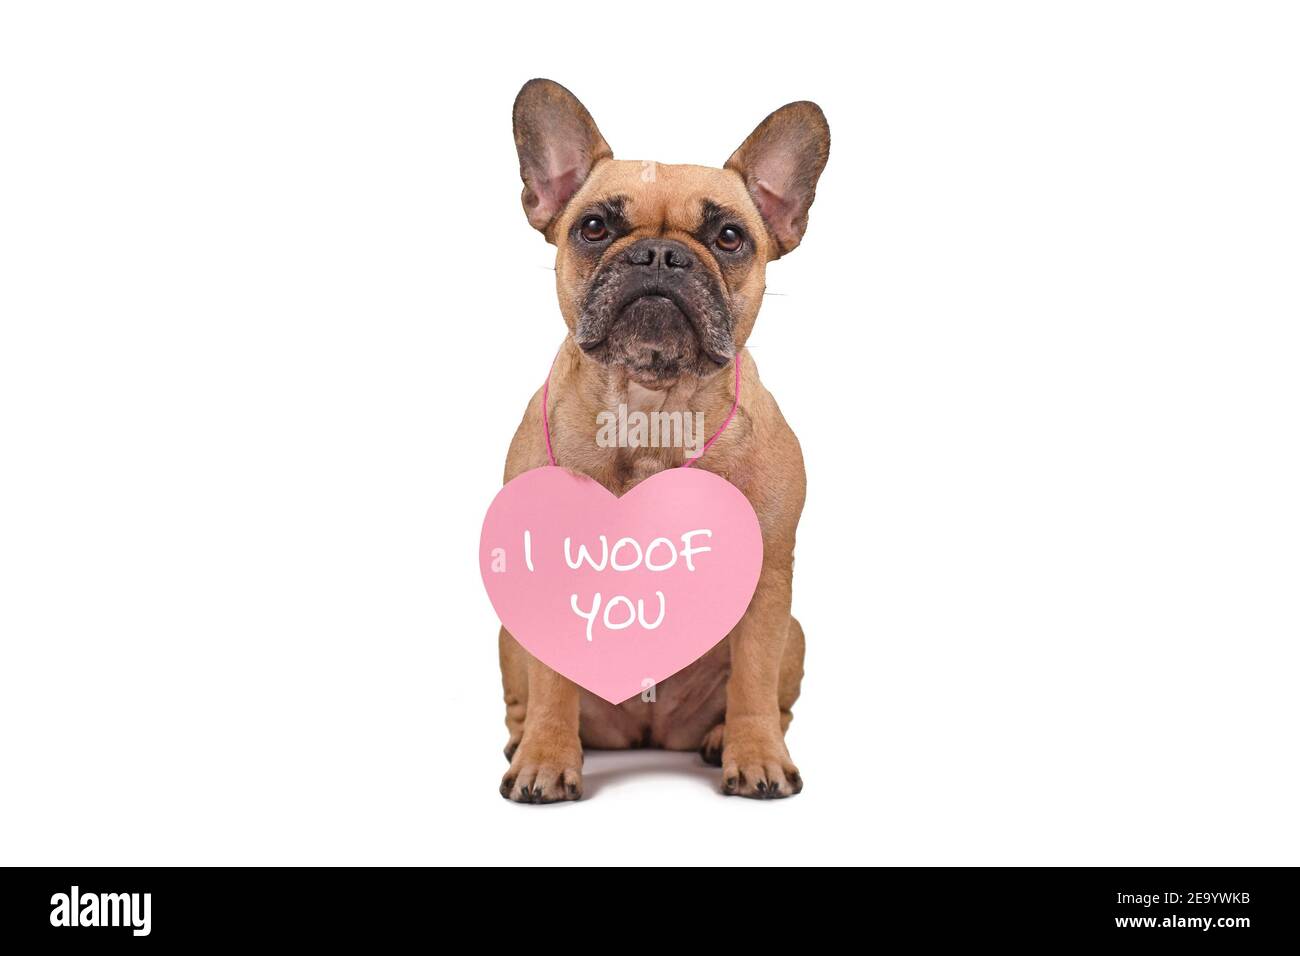 Cute French Bulldog dog wearing Valentine's Day heart with text 'I woof you' around neck isolated on white background Stock Photo